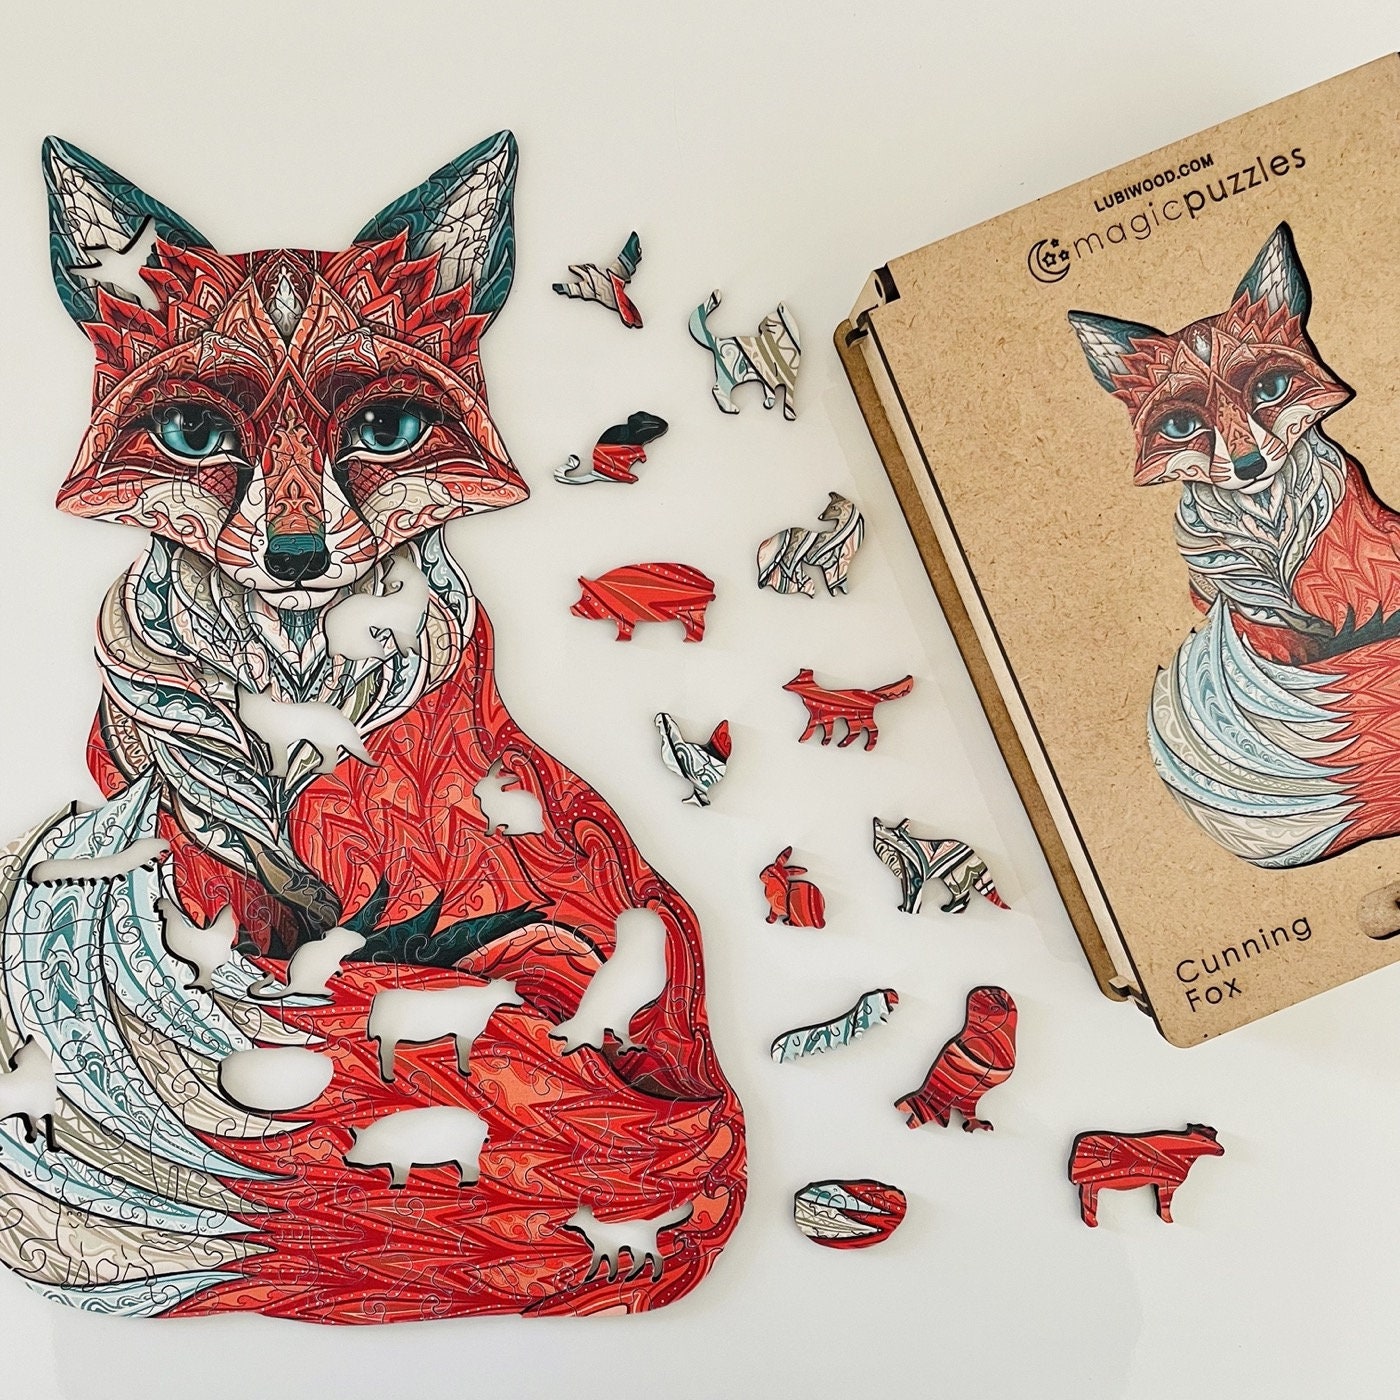 A3 A4 A5 Wooden Jigsaw Puzzles Unique Fox Animal Adult Kid Toy Gift Home Decor~ 